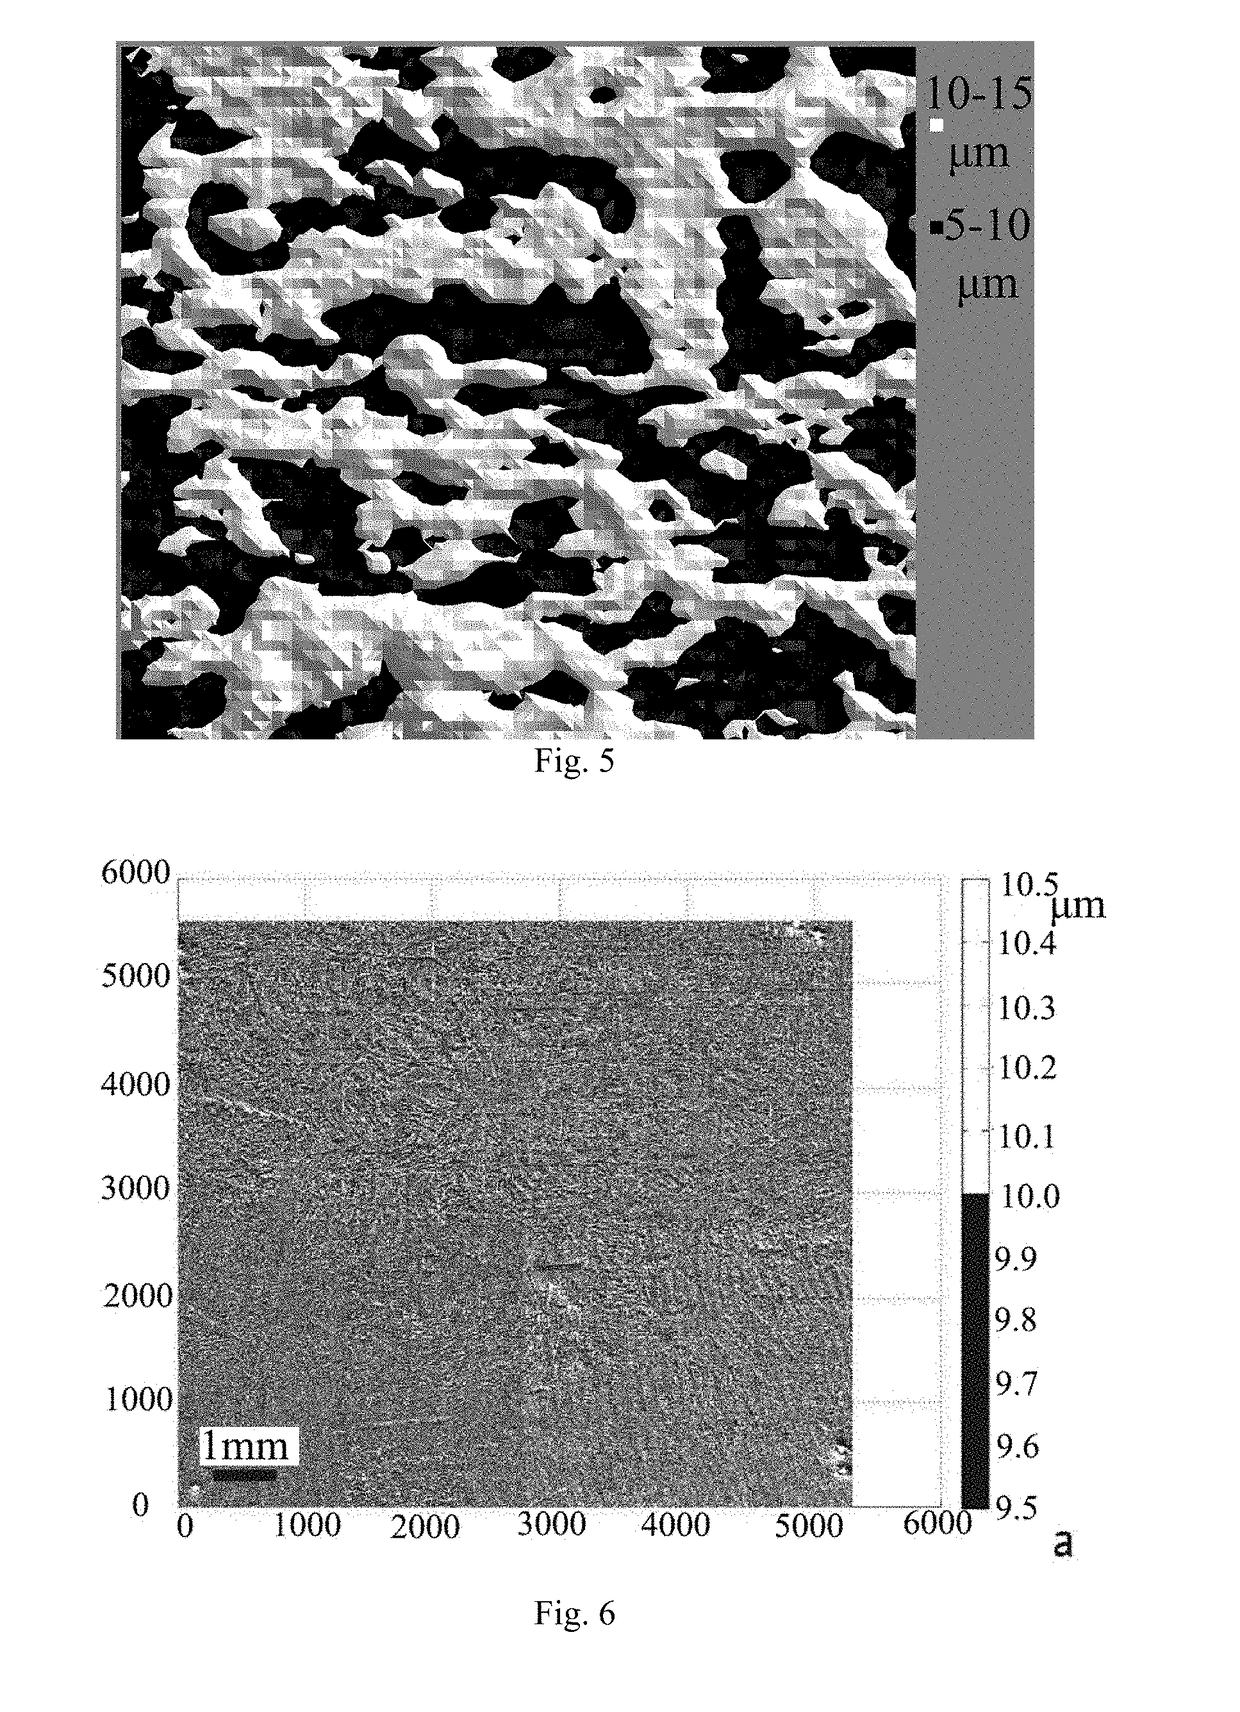 Full-field statistical & characterizing method of fluid micro-explored strain for alloy microstructure